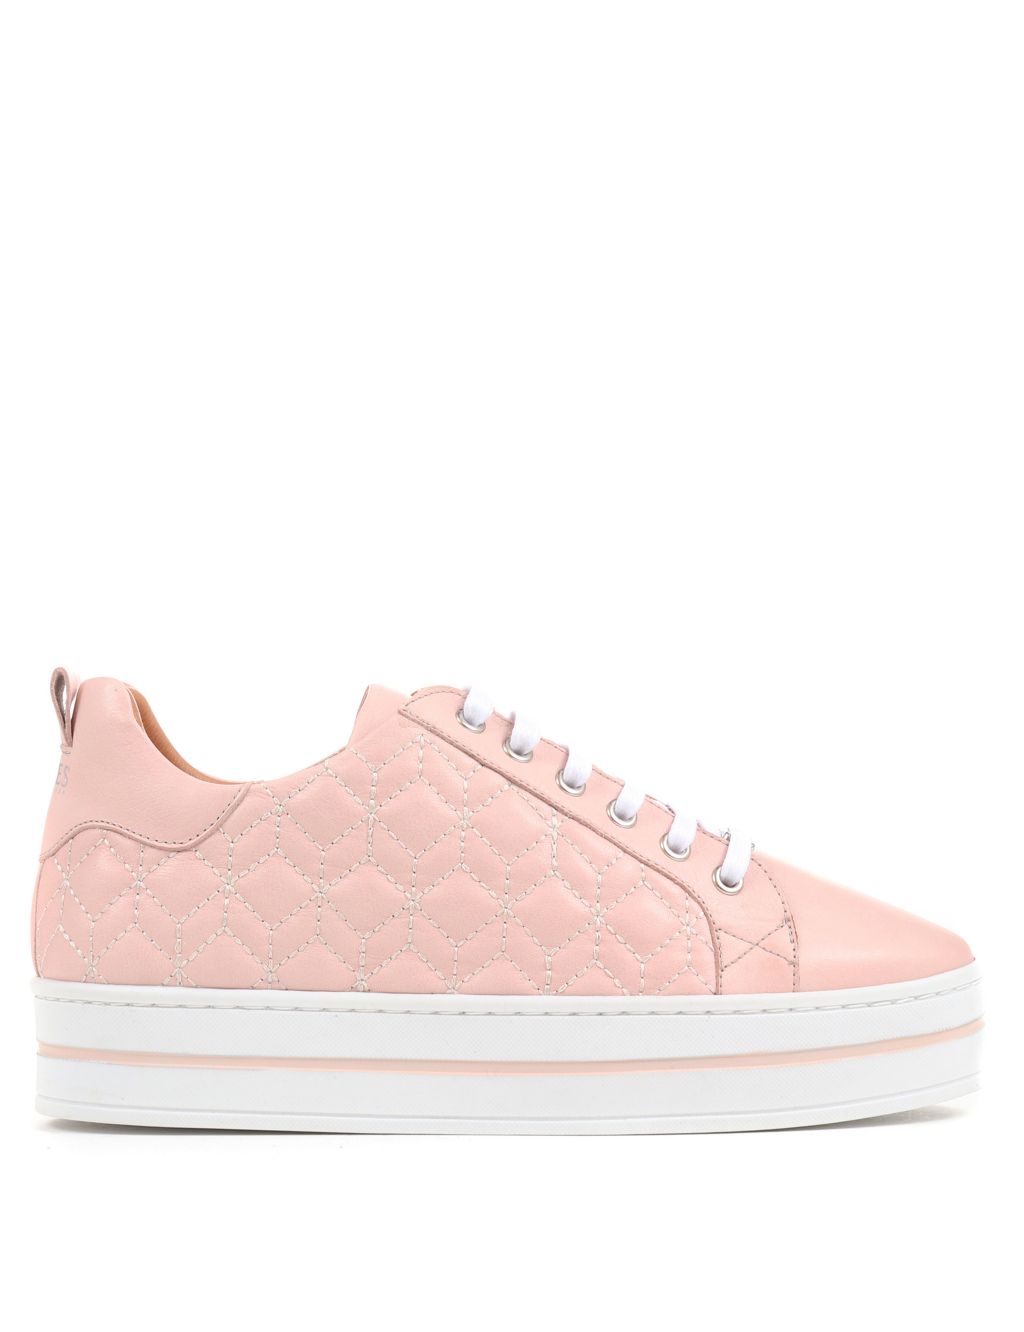 Leather Lace Up Chunky Trainers image 5